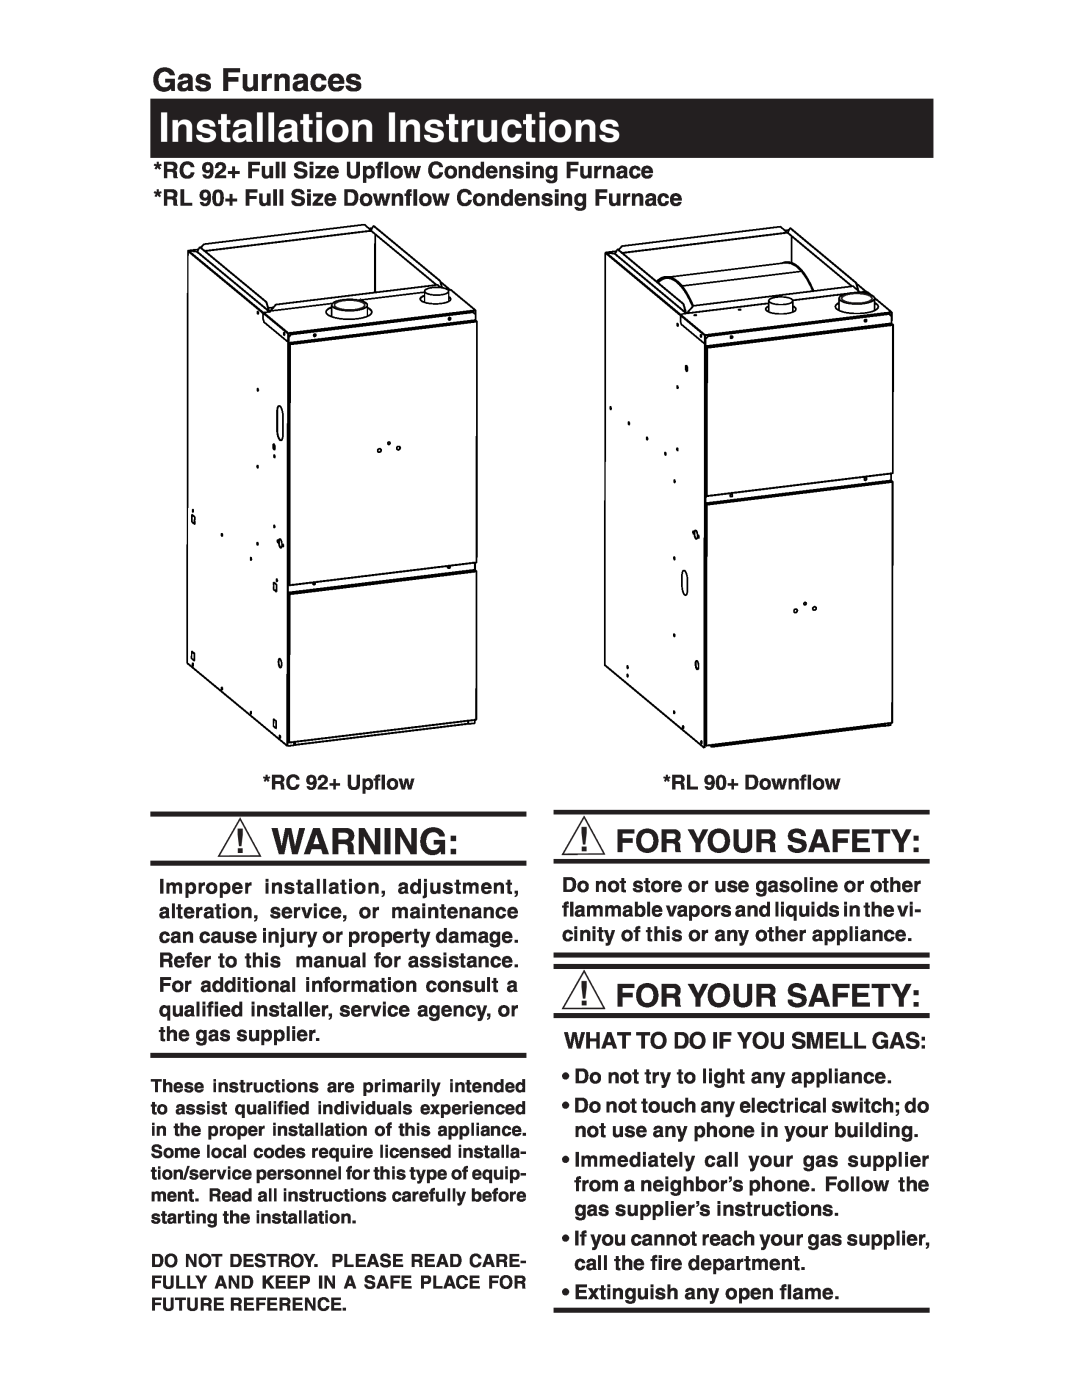 Nordyne installation instructions What To Do If You Smell Gas, RC 92+ Upﬂow, RL 90+ Downﬂow, Extinguish any open ﬂame 